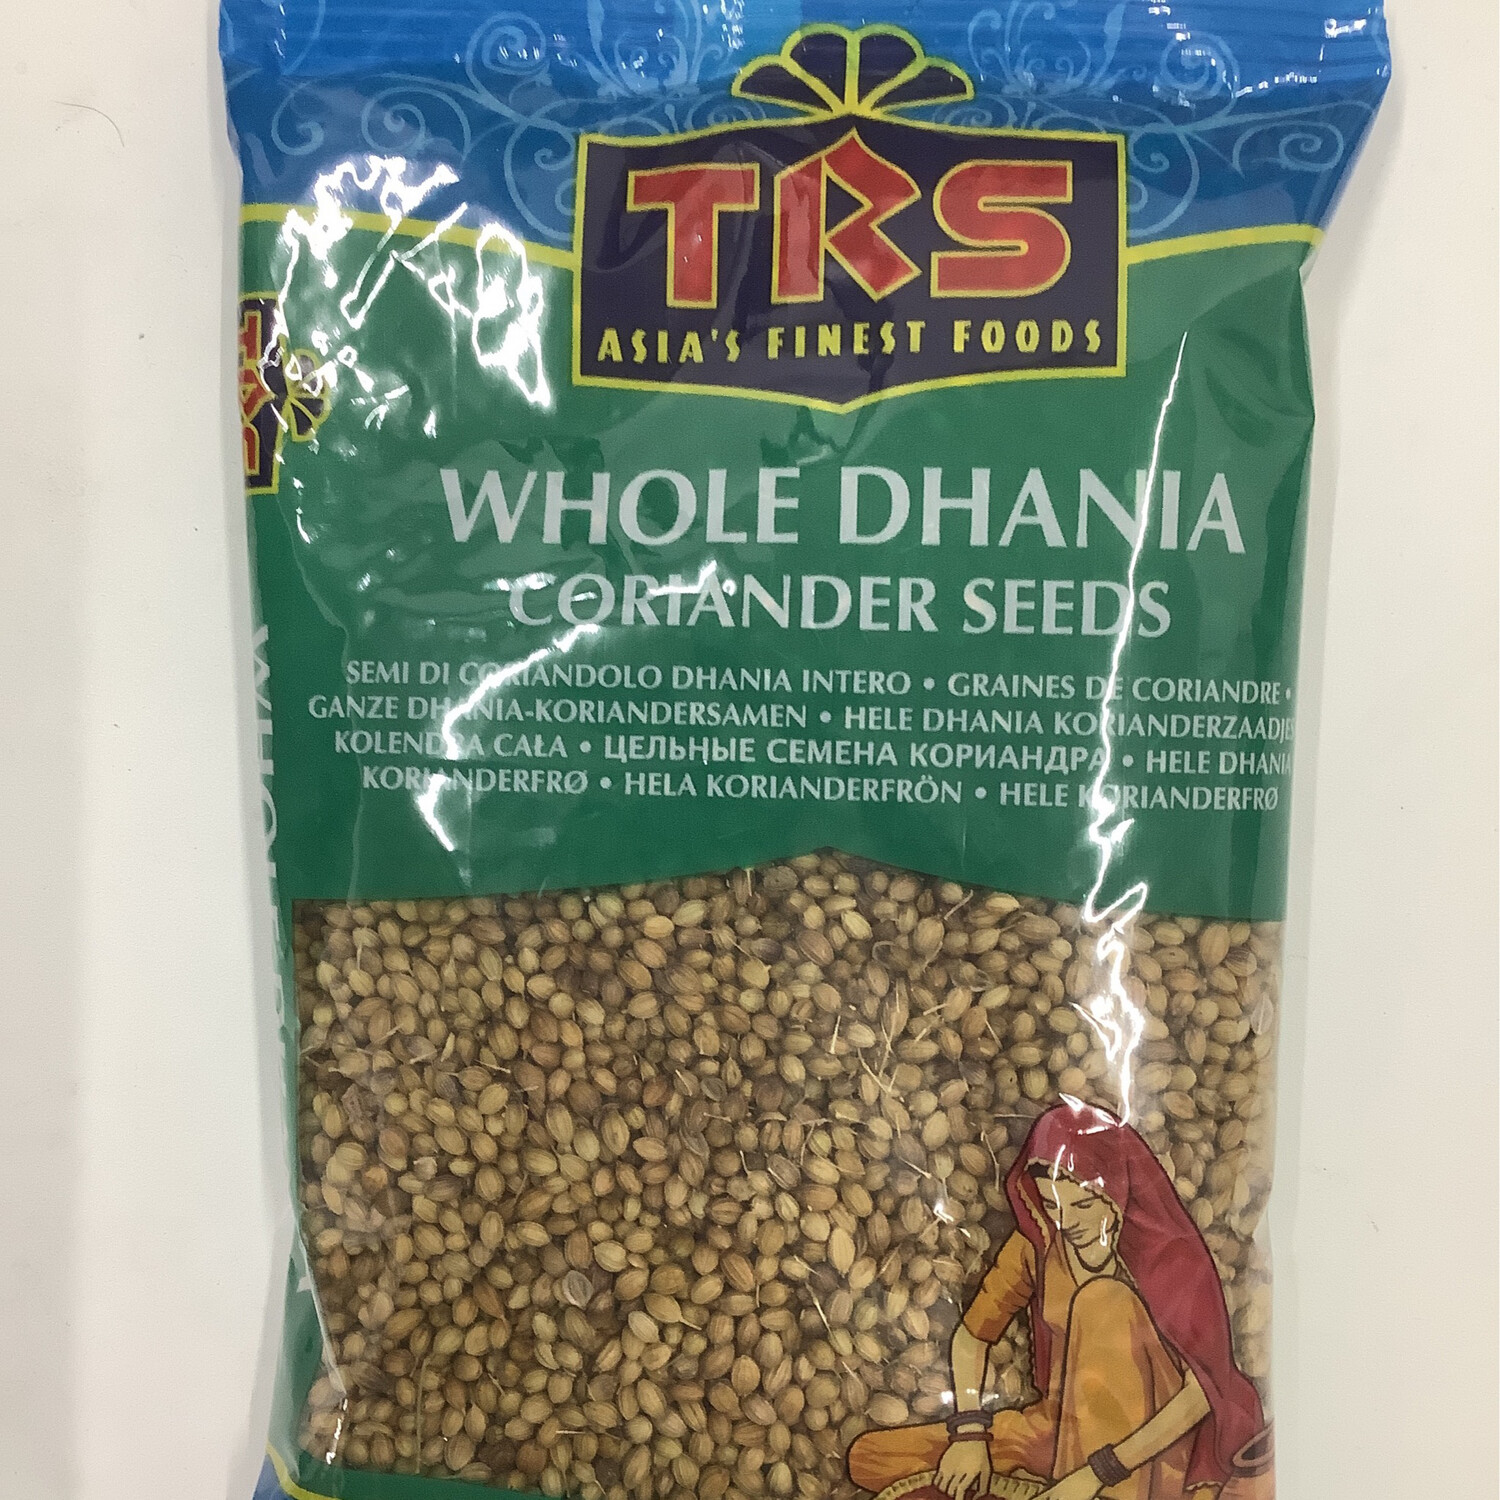 TRS Whole Dhania Coriander Seeds 250g